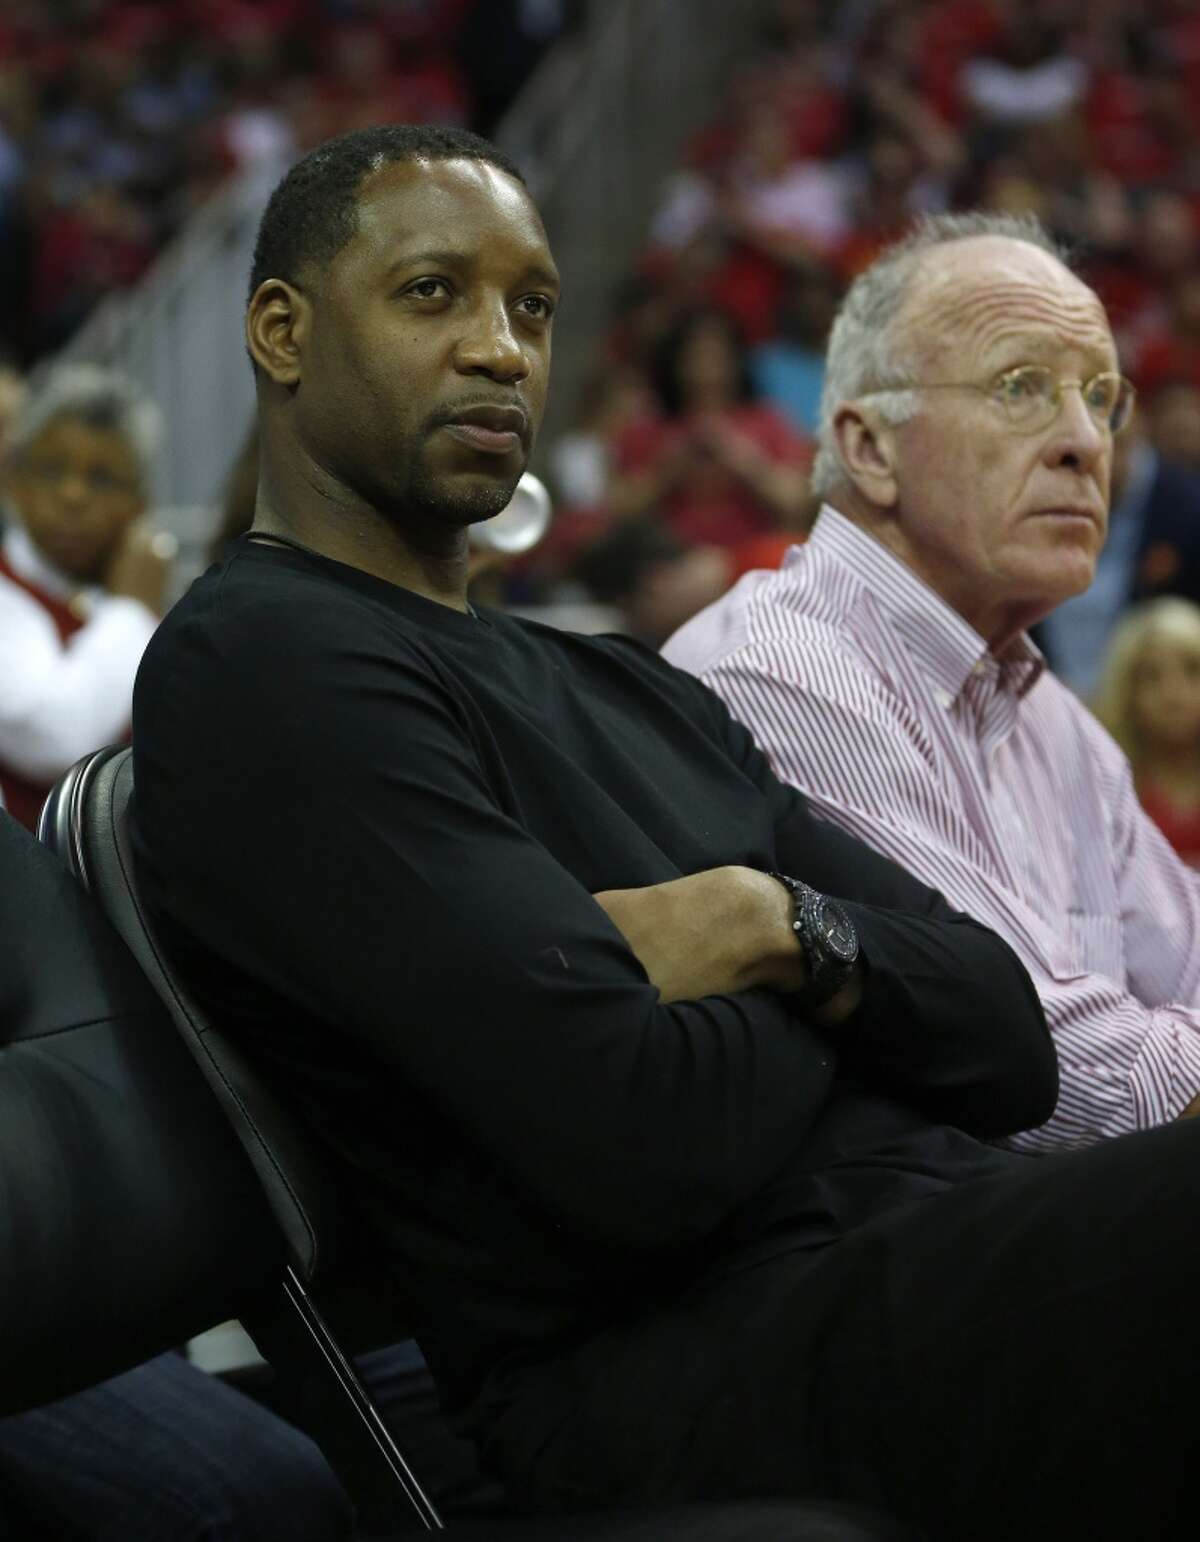 Former Rockets star Tracy McGrady will be joining the media contingent as an NBA analyst for ESPN. Click through the gallery to see photos of McGrady through the years.